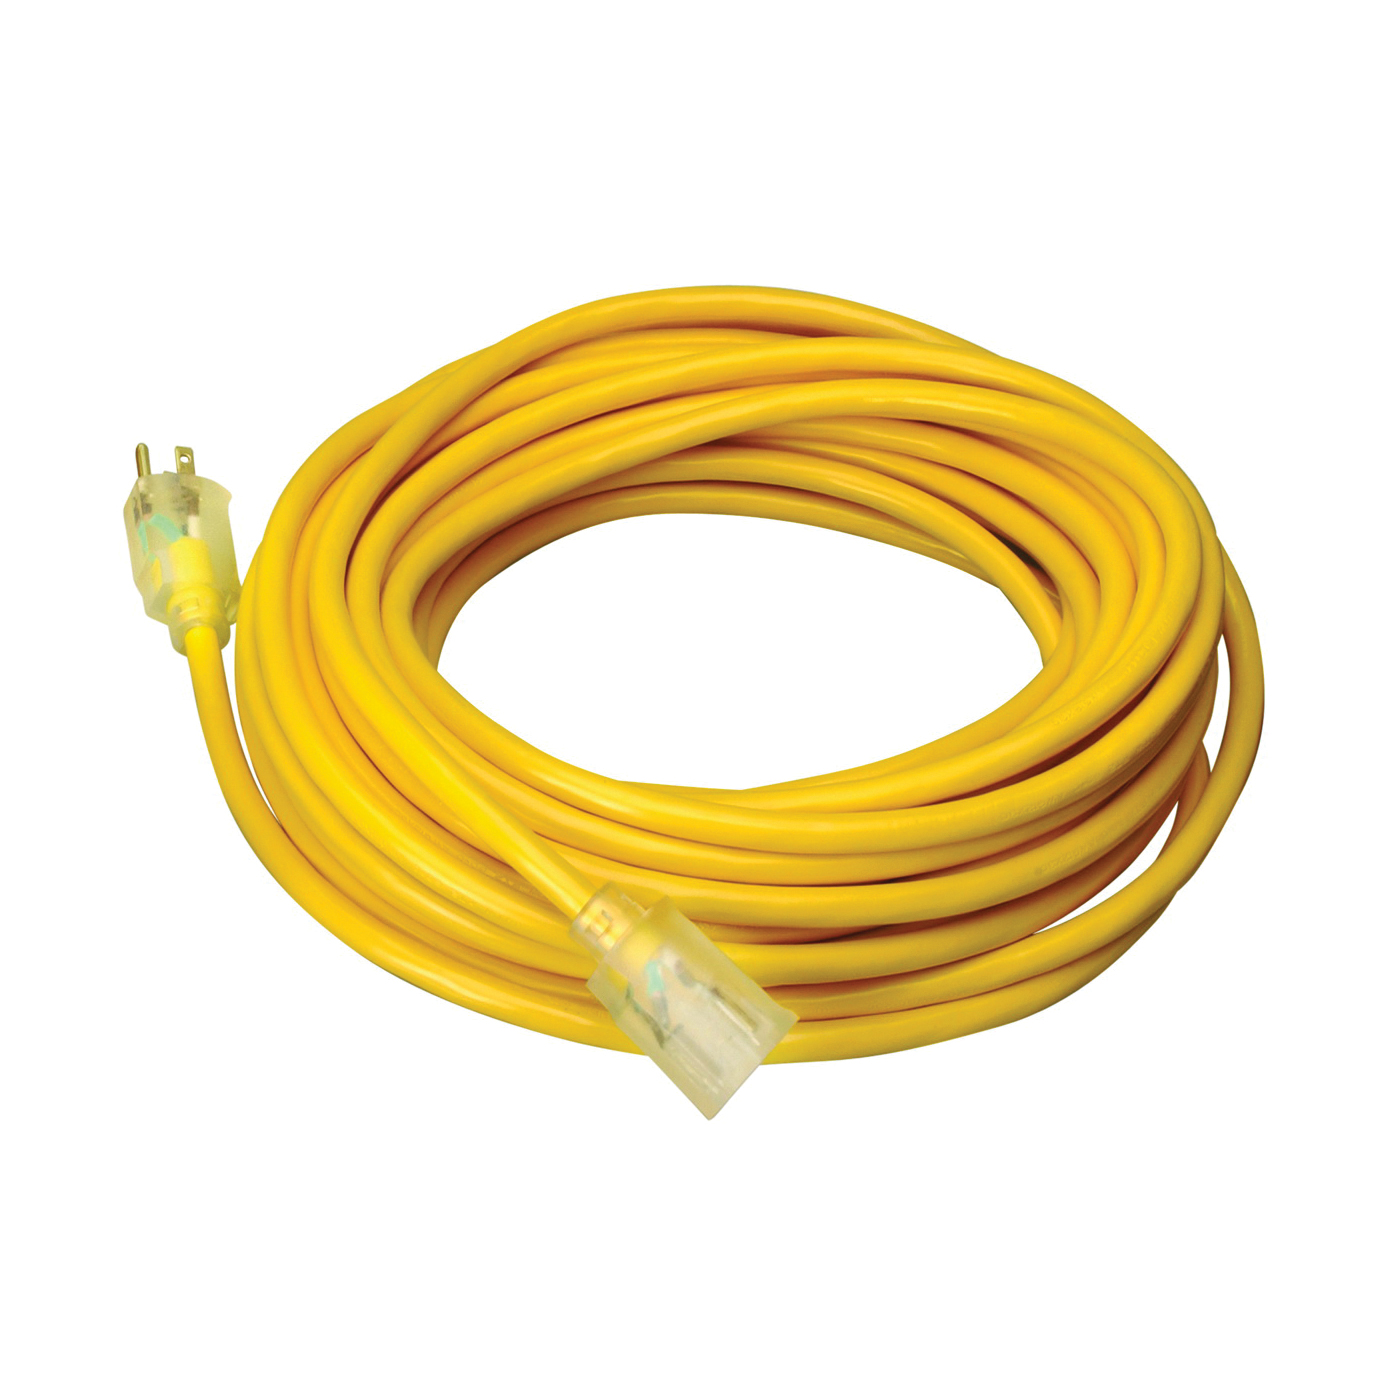 CCI 025878802 Extension Cord, 12 AWG Cable, 25 ft L, 15 A, 125 V, Yellow